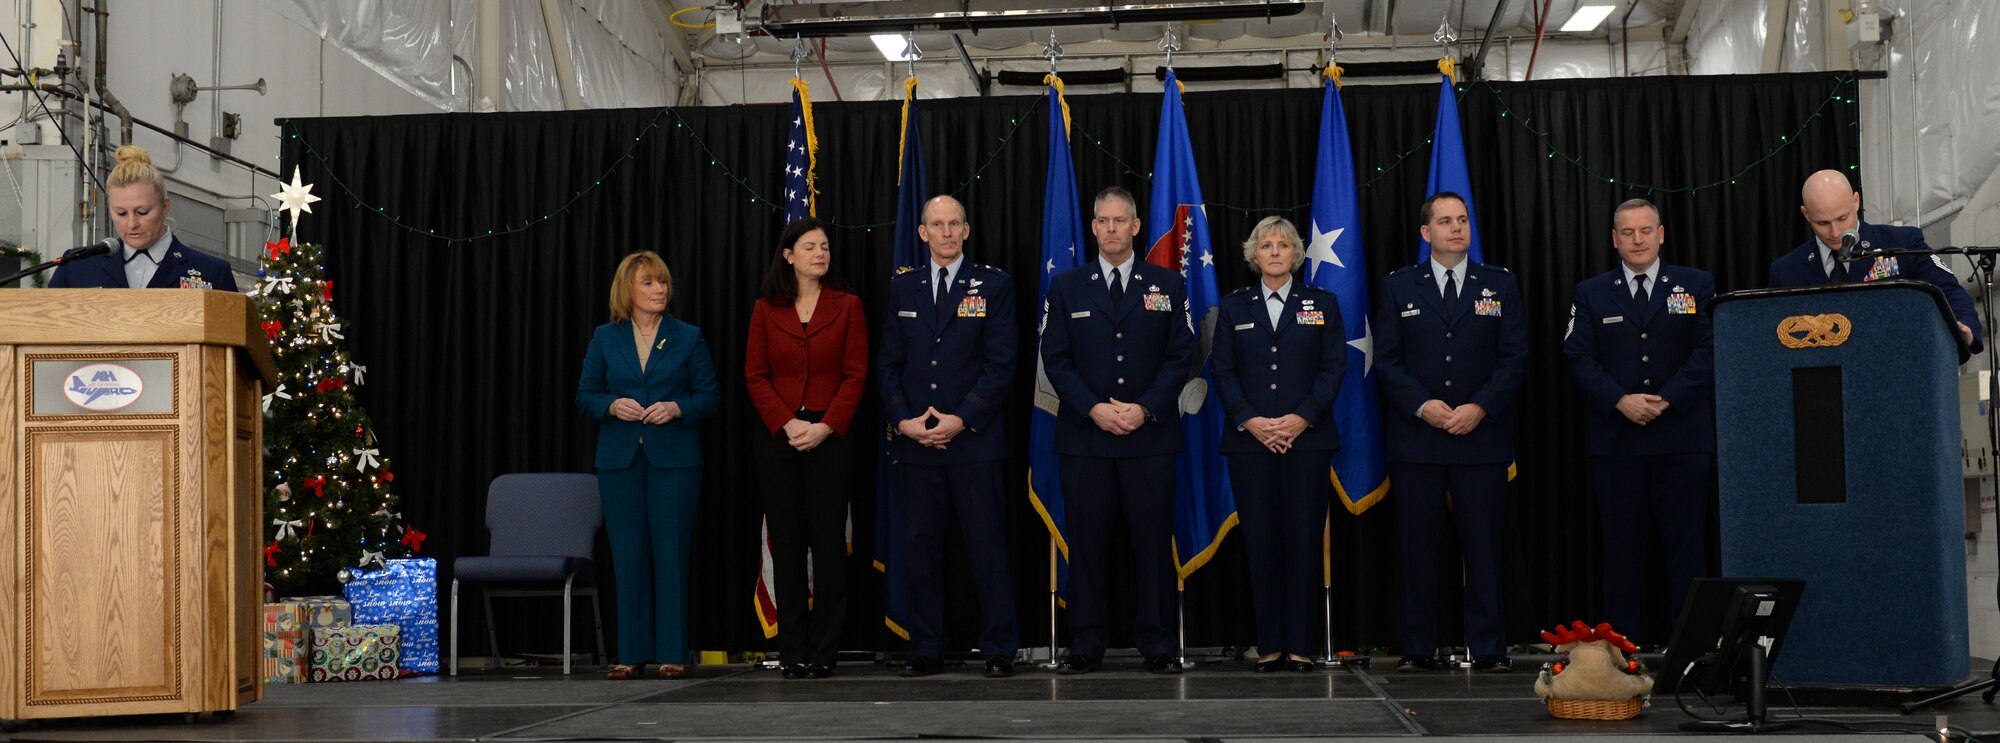 Senior leaders of the New Hampshire Air National Guard prepare to present awards to airmen during an annual awards ceremony which highlights the top airmen from the wing, Pease Air National Guard Base, N.H., Dec 7, 2014.  Onstage to present the awards are (from left) Tech Sgt. Kimbery Comstock, N.H. Governor Maggie Hassan, U.S. Senator Kelley Ayotte, N.H. Adjutant General Maj. Gen. William N. Reddel, State Command Chief Master Sgt. Matthew Collier, N.H. Air National Guard Commander Brig. Gen. Carolyn Protzmann, 157th Air Refueling Wing Commander Shawn Burrus, Wing Command Master Sgt. James Lawrence, and Tech. Sgt. Jeffrey Inferrere. (Air National Guard photot by Staff Sgt. Curtis J. Lenz/Released)